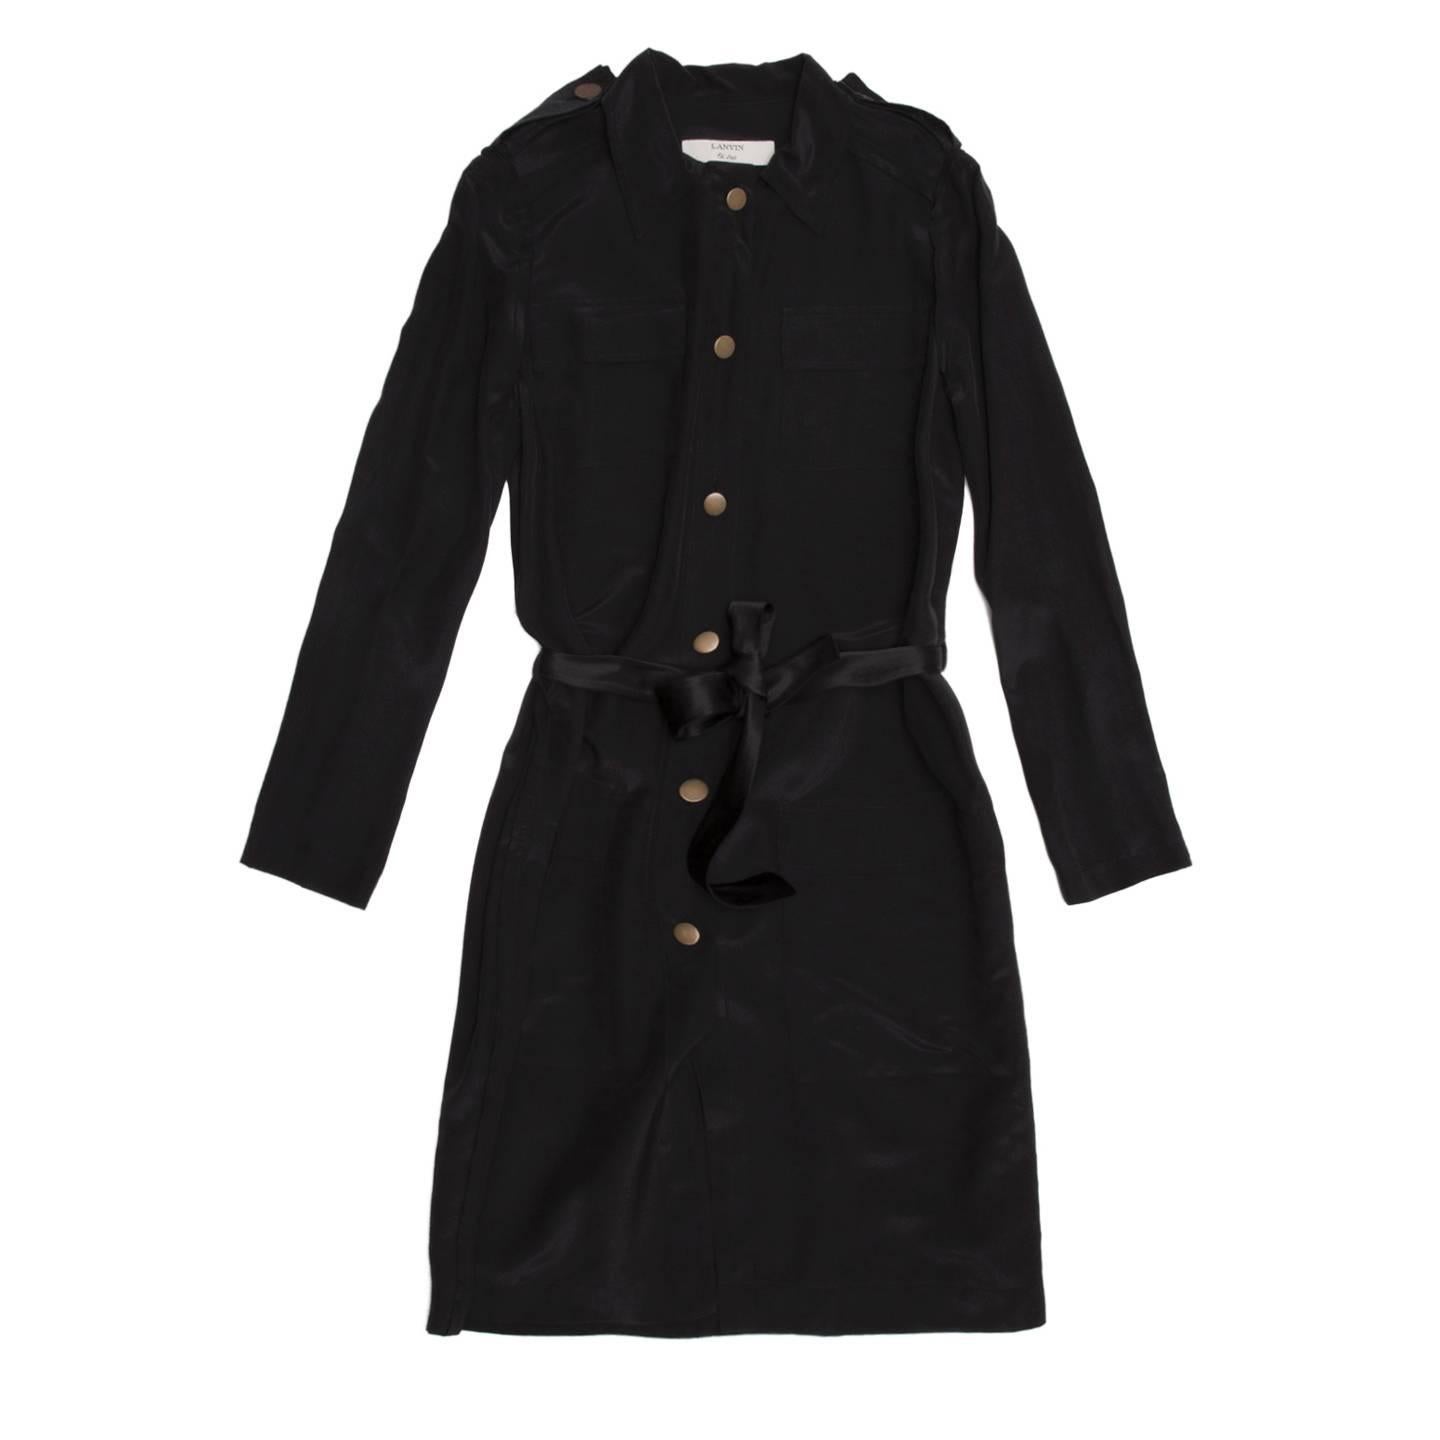 Black silk/cotton blend shirt-dress whit a spread shirt collar and brass metal buttons fastening the front opening from neck to hem. The front is embellished by 4 squared patch pockets with flaps and the waist by a satin belt to knot at front. The